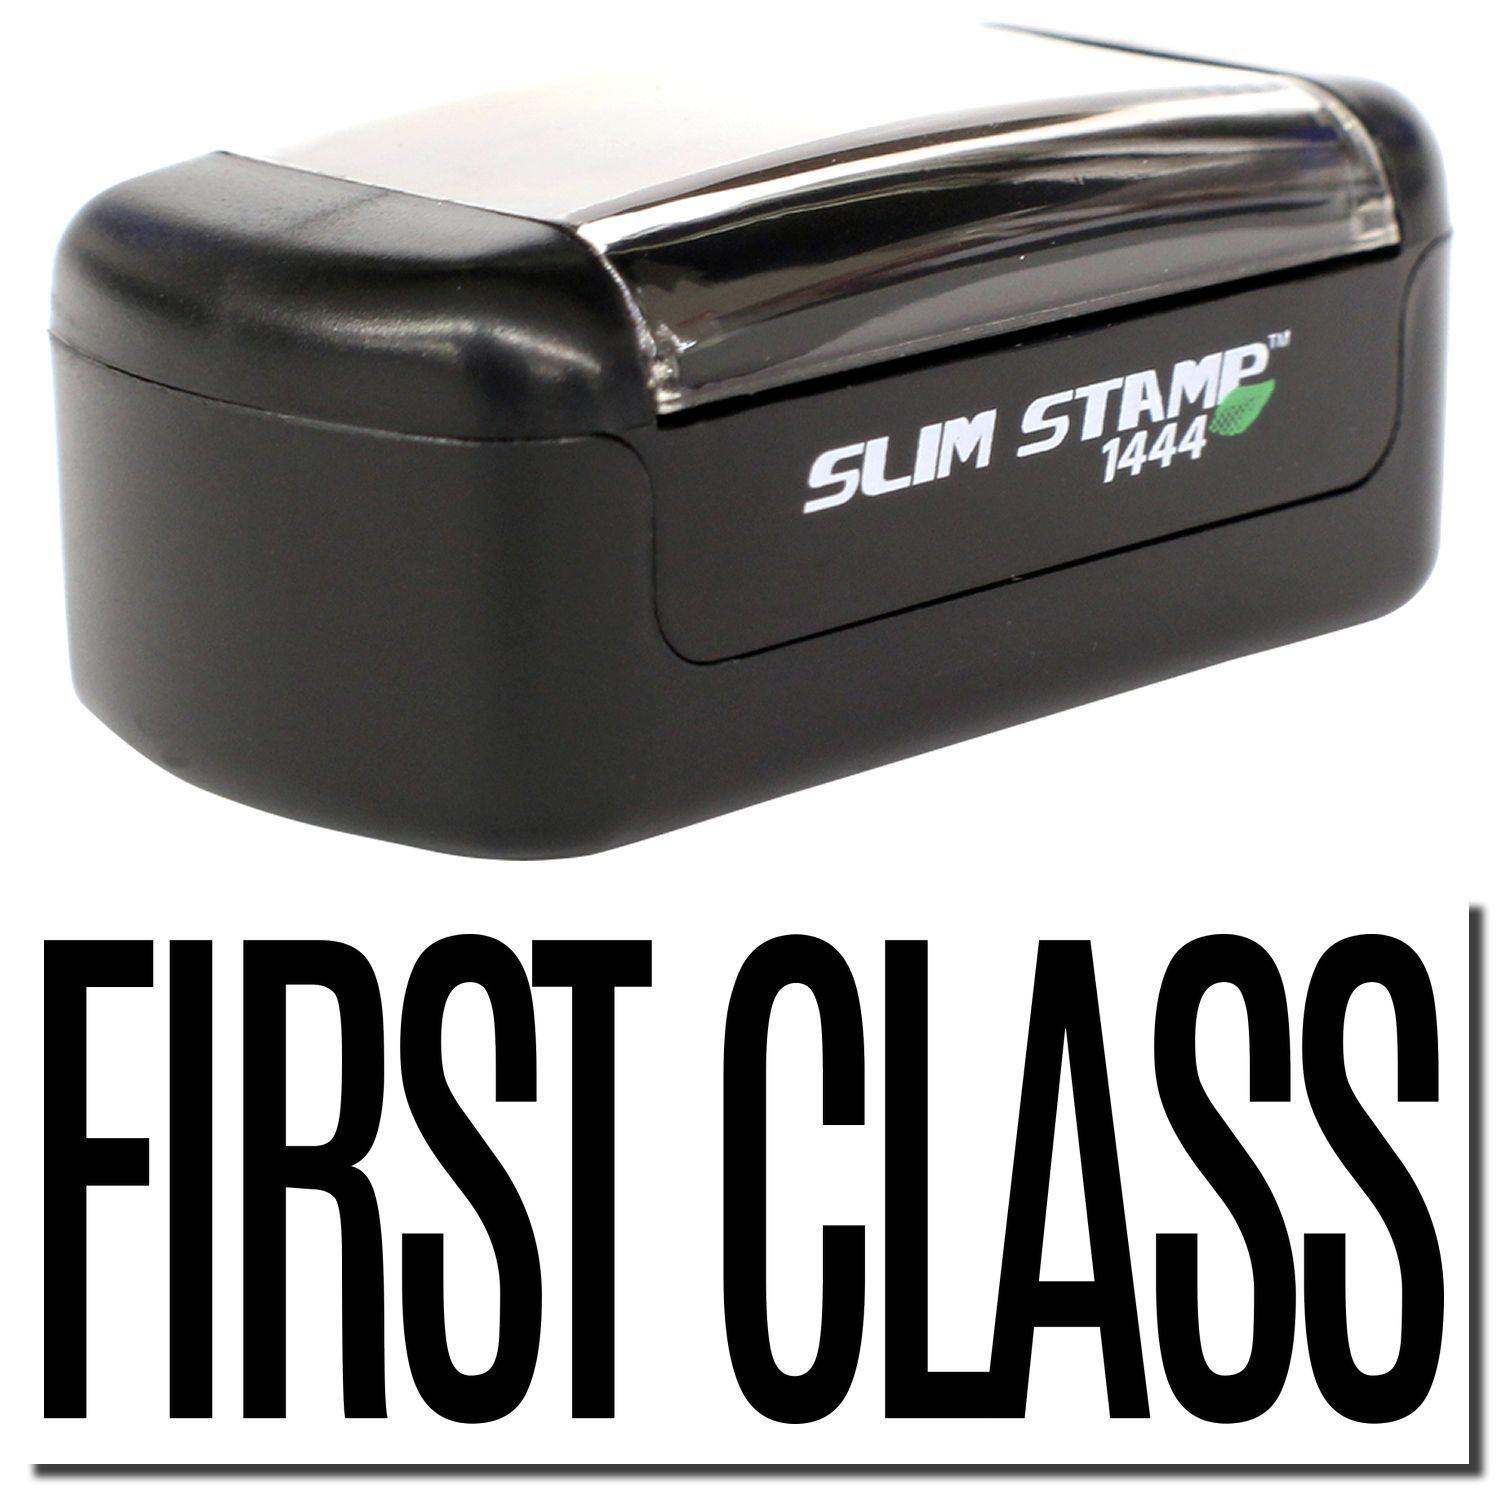 A stock office pre-inked stamp with a stamped image showing how the text "FIRST CLASS" is displayed after stamping.